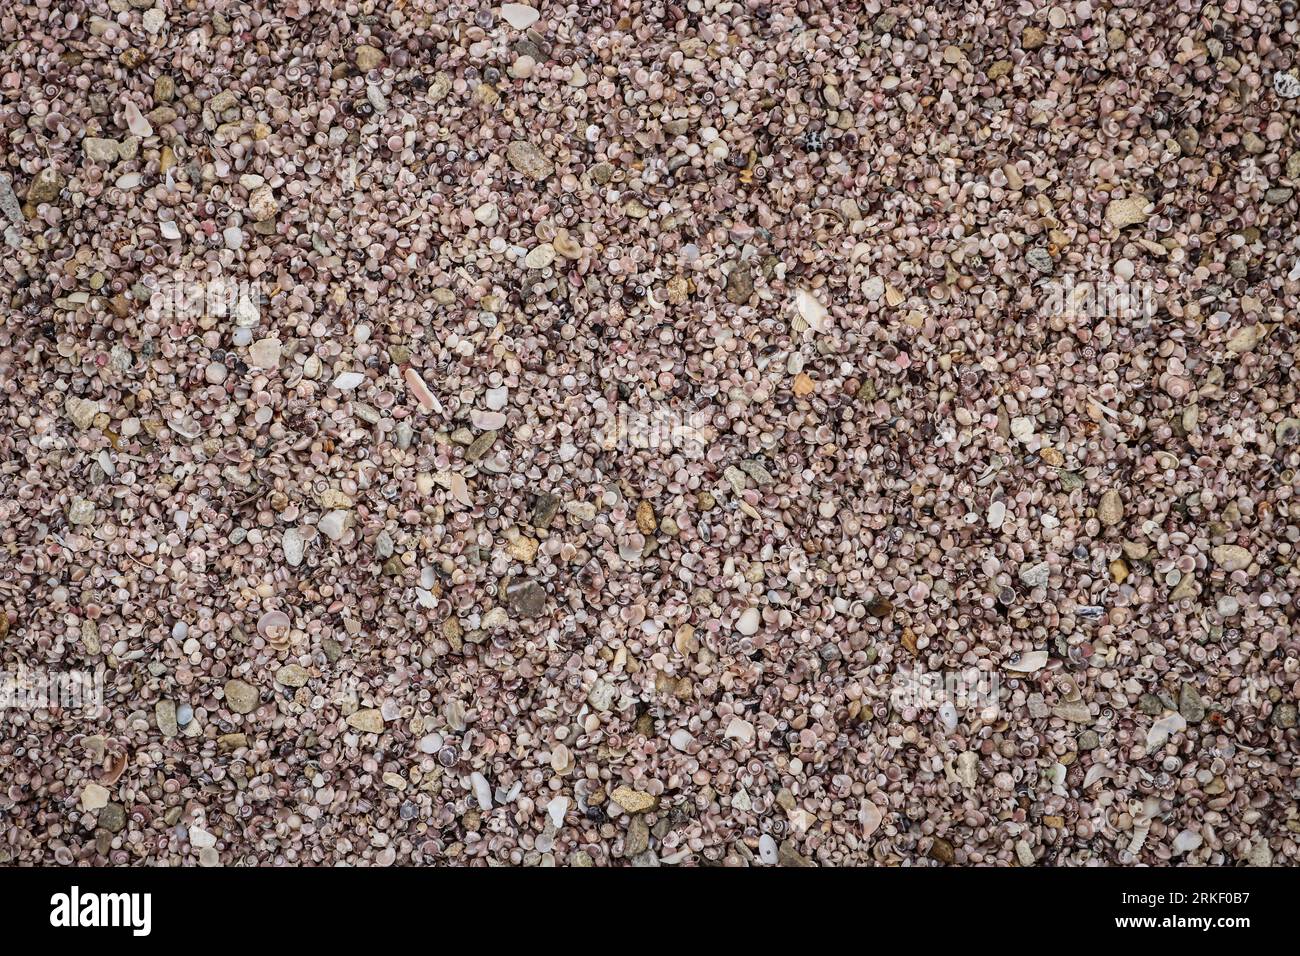 Background of small pinkish shells, texture for design. Stock Photo